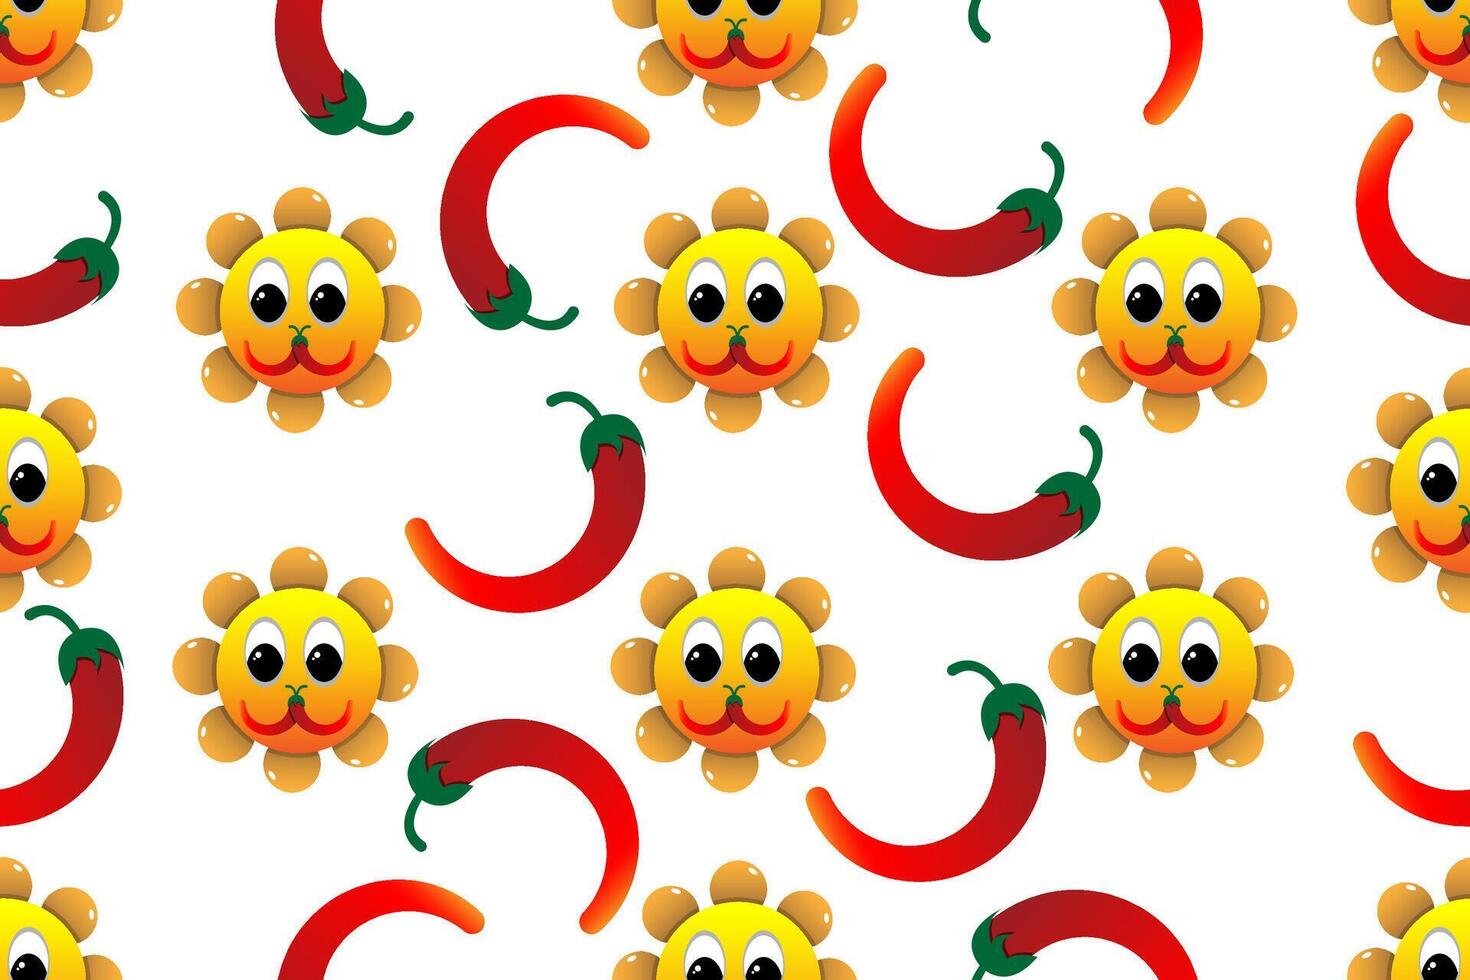 Seamless pattern tile cartoon with sun flowers and red chili illustration. Red Chili and sun flowers funny decorative pattern ornament background. vector